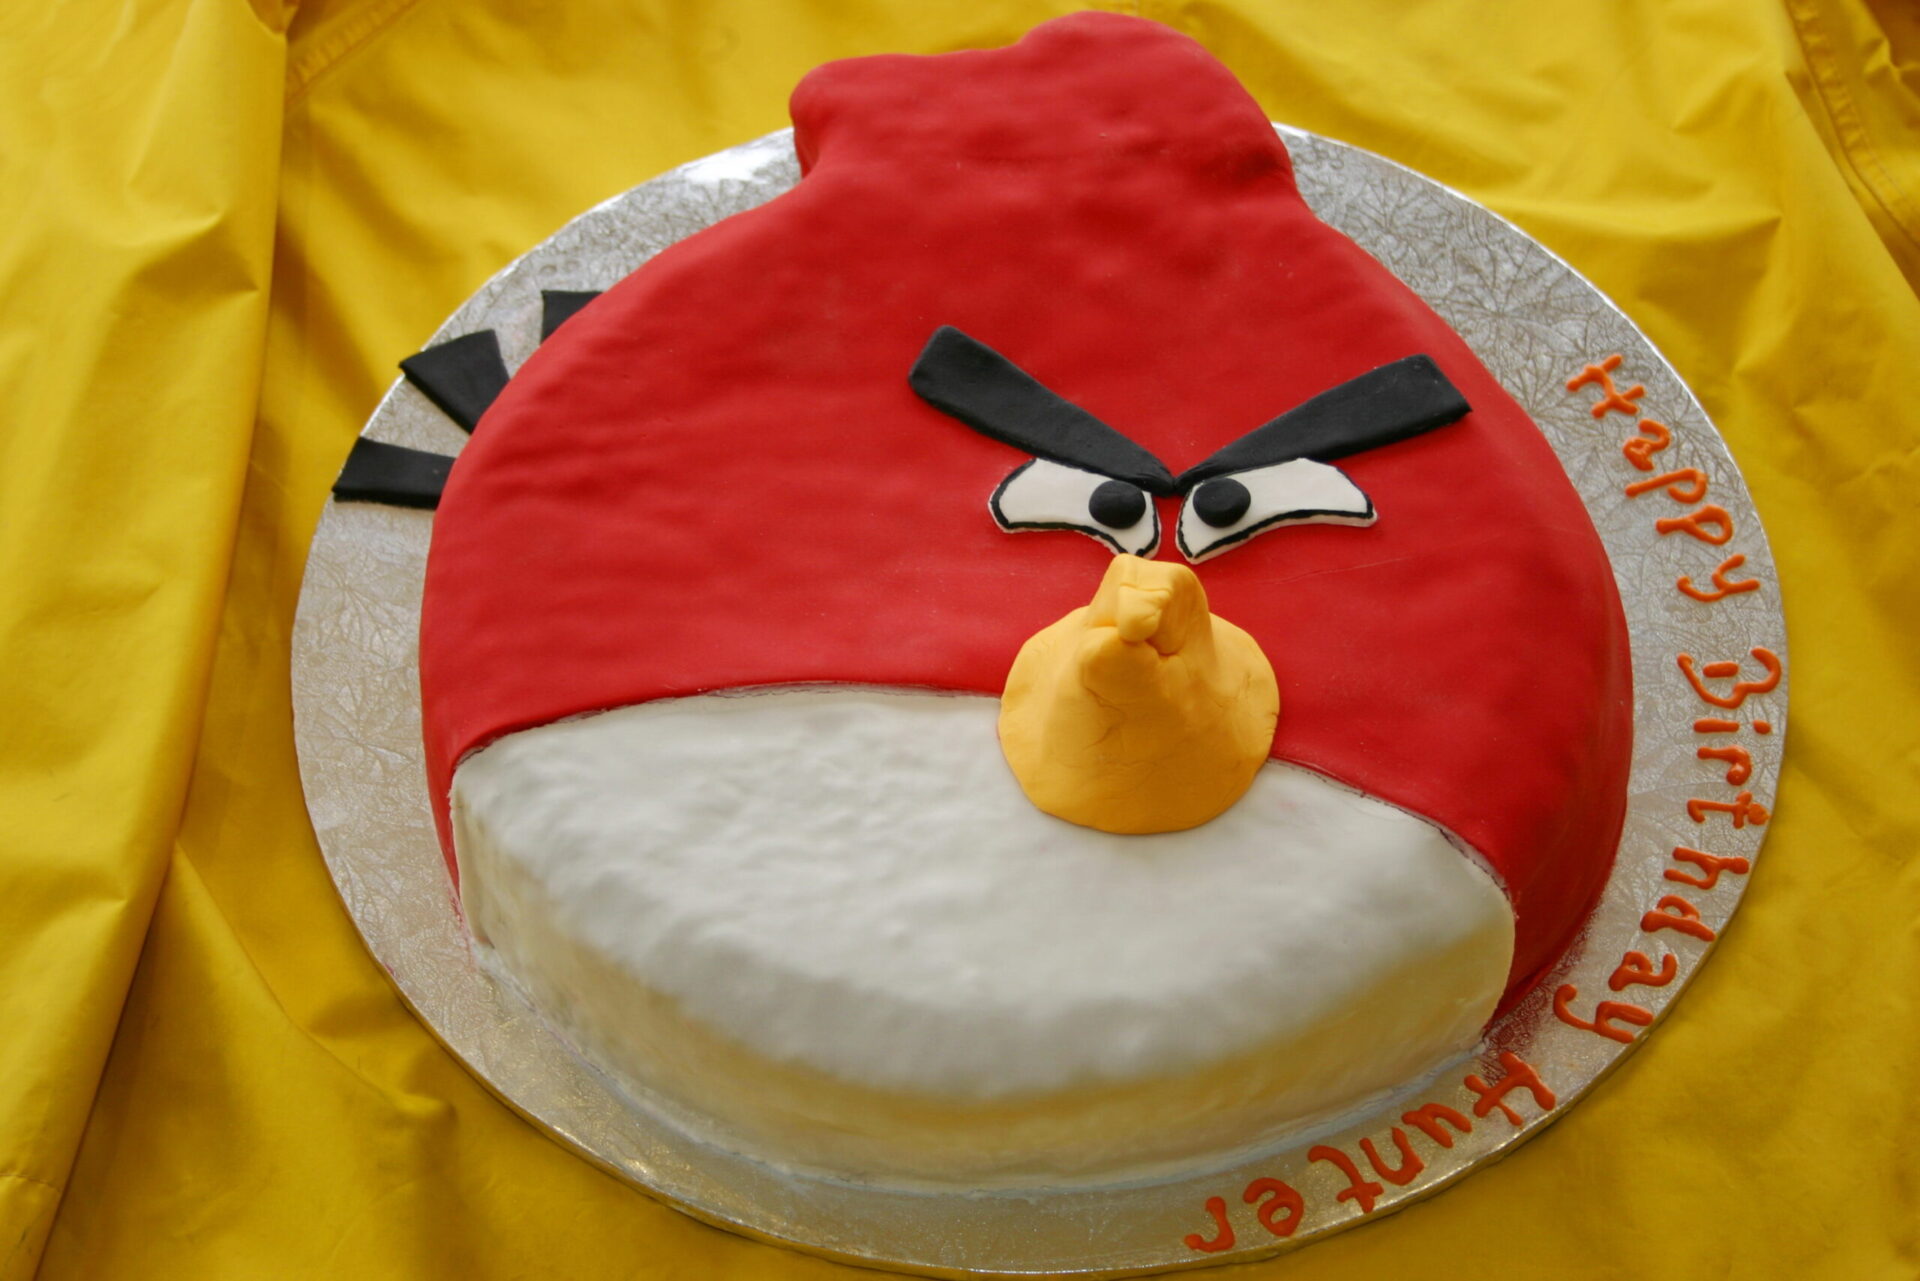 How to make an Angry Birds birthday cake - My Silly Squirts